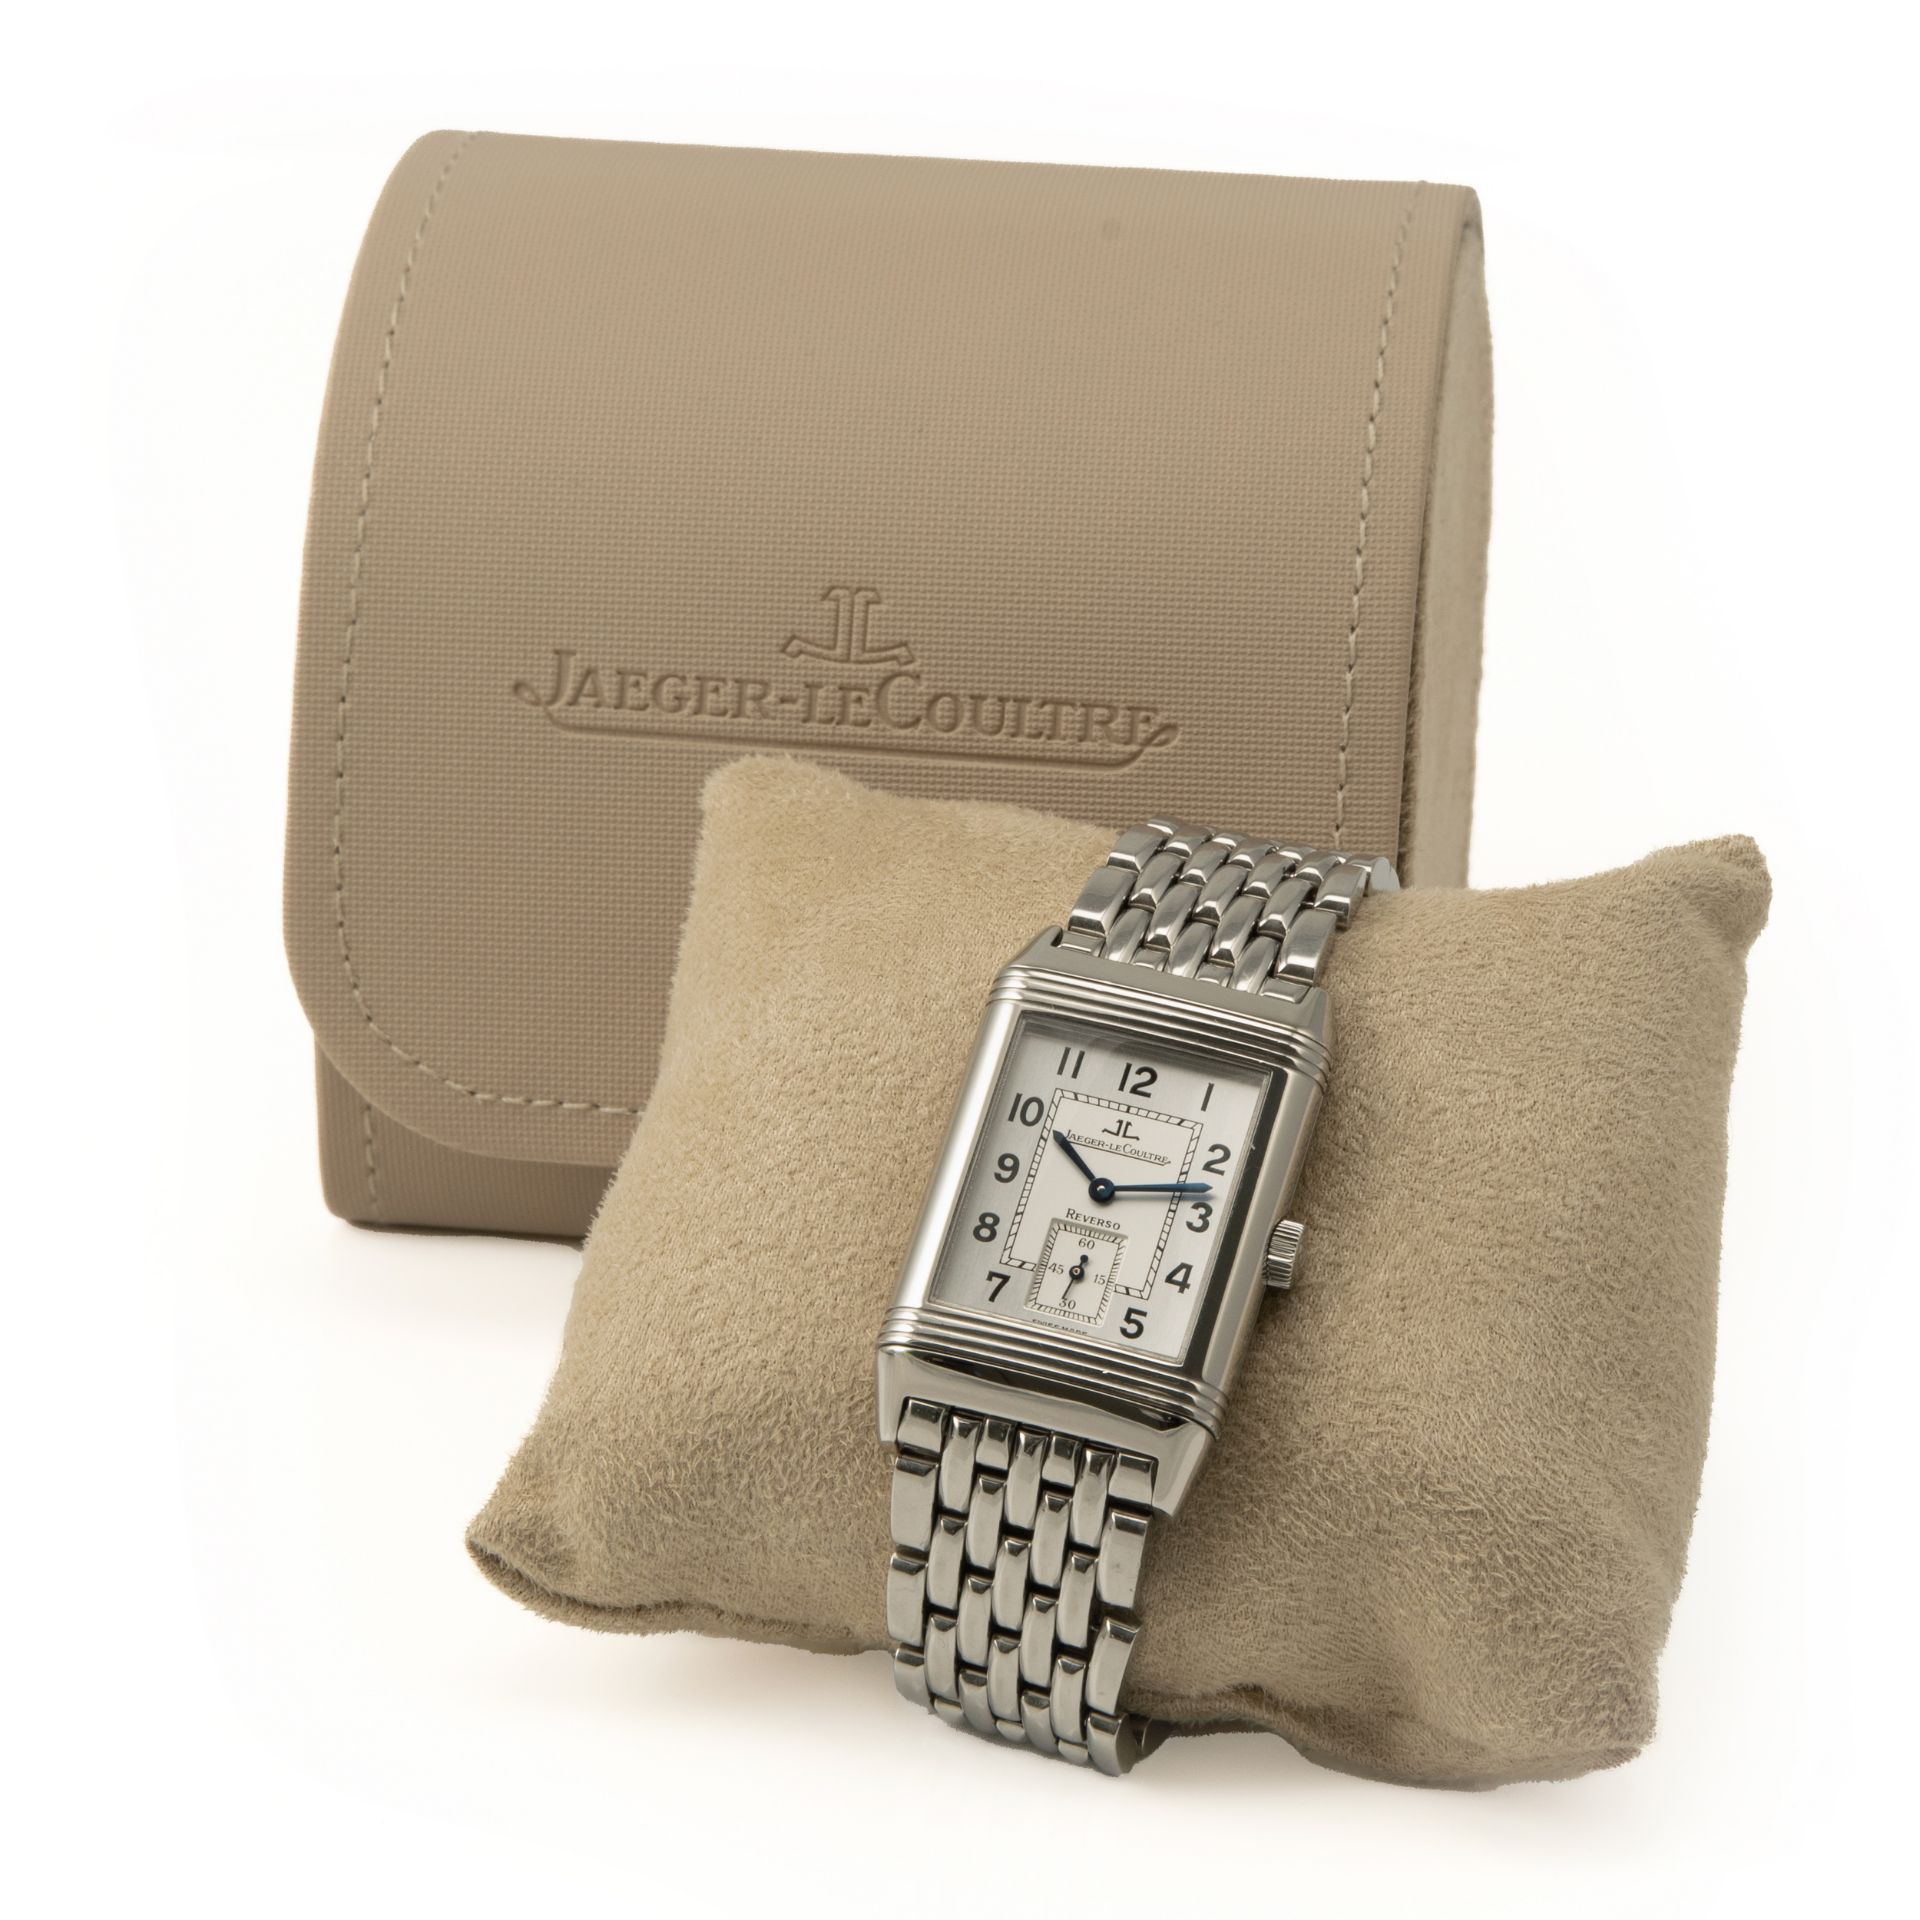 Jaeger-LeCoultre Reverso Grande Taille - Image 4 of 4